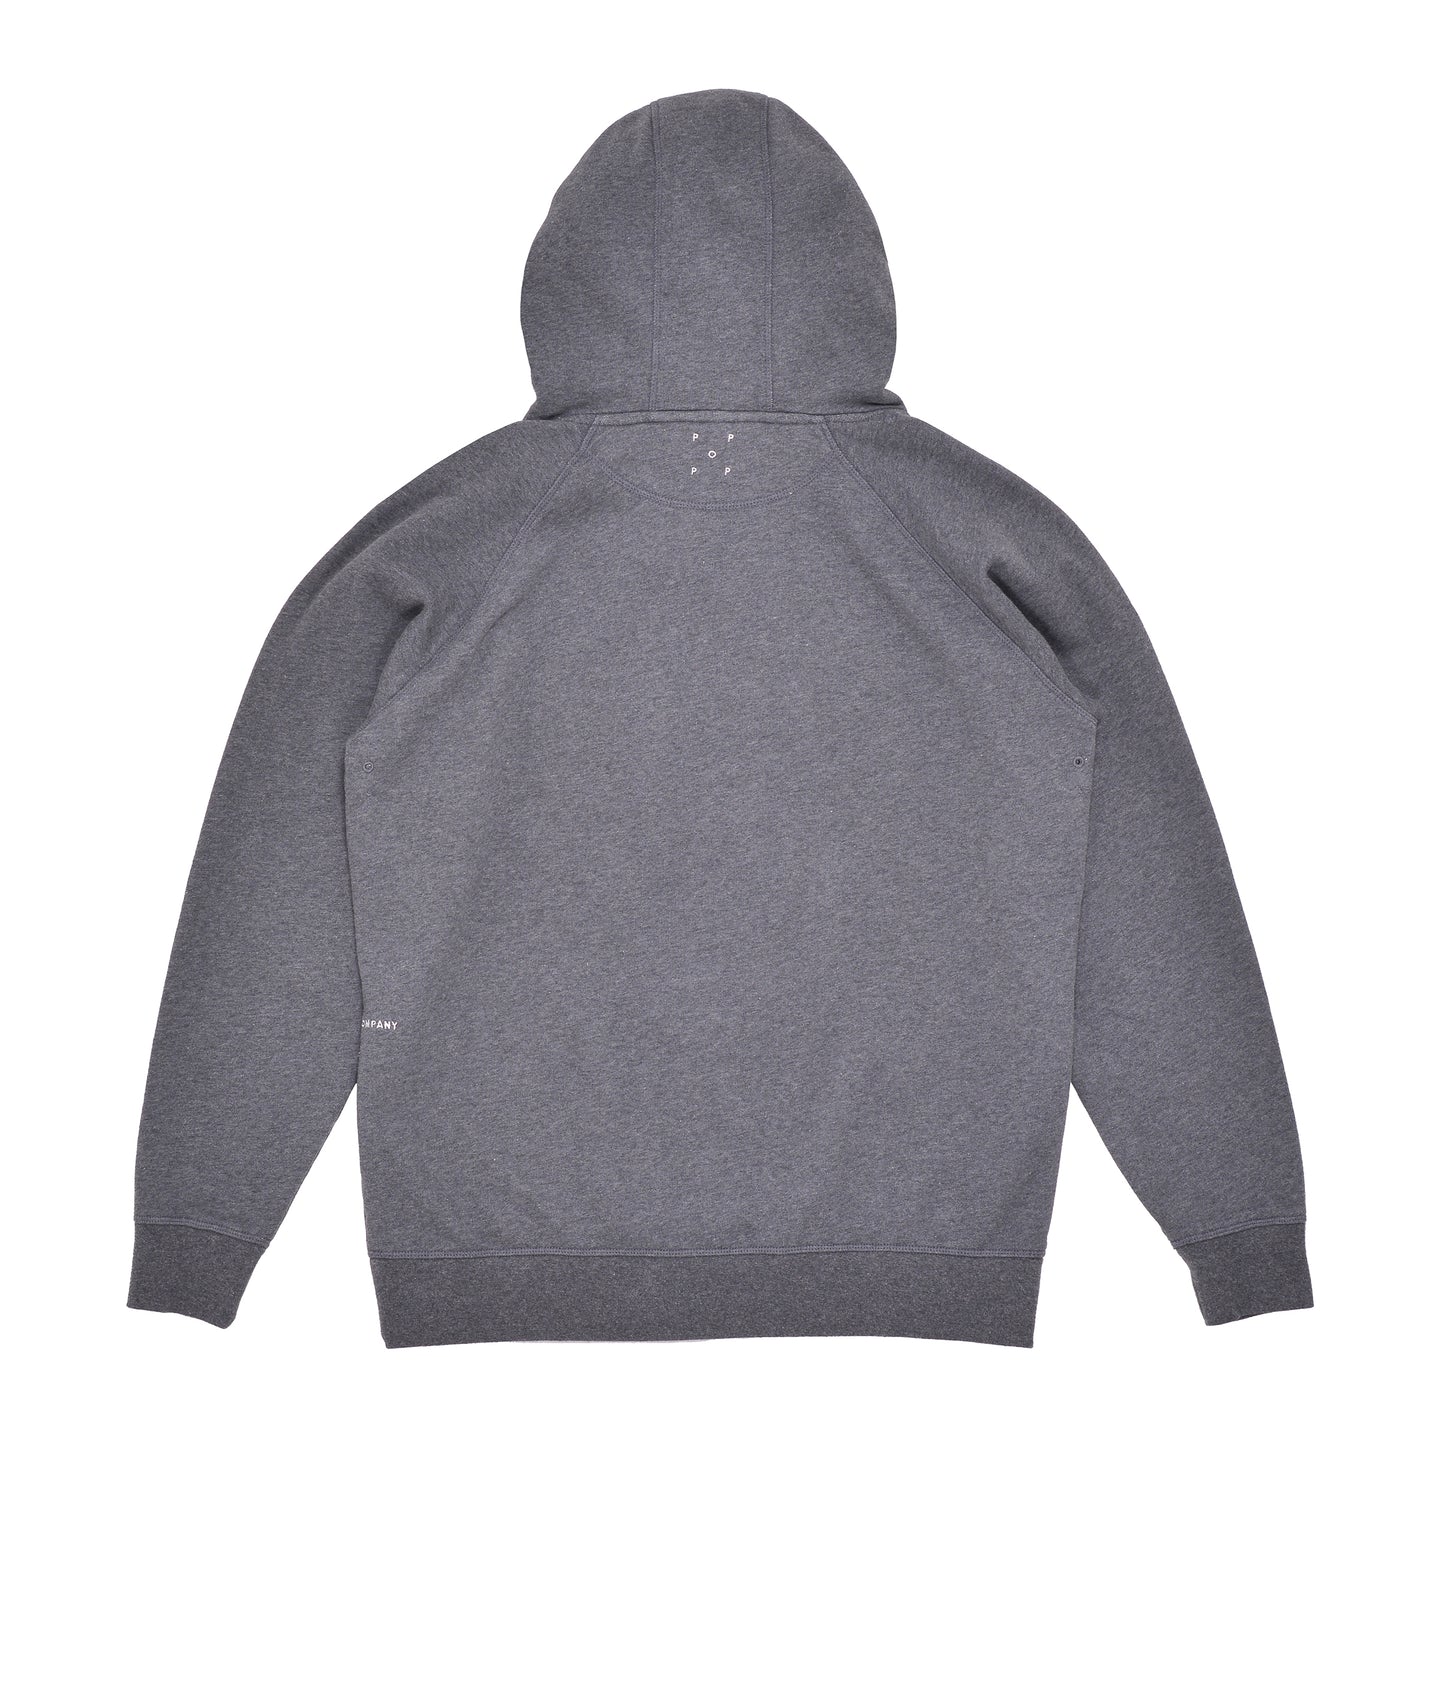 POP Company Hooded Sweater Charcoal Heather